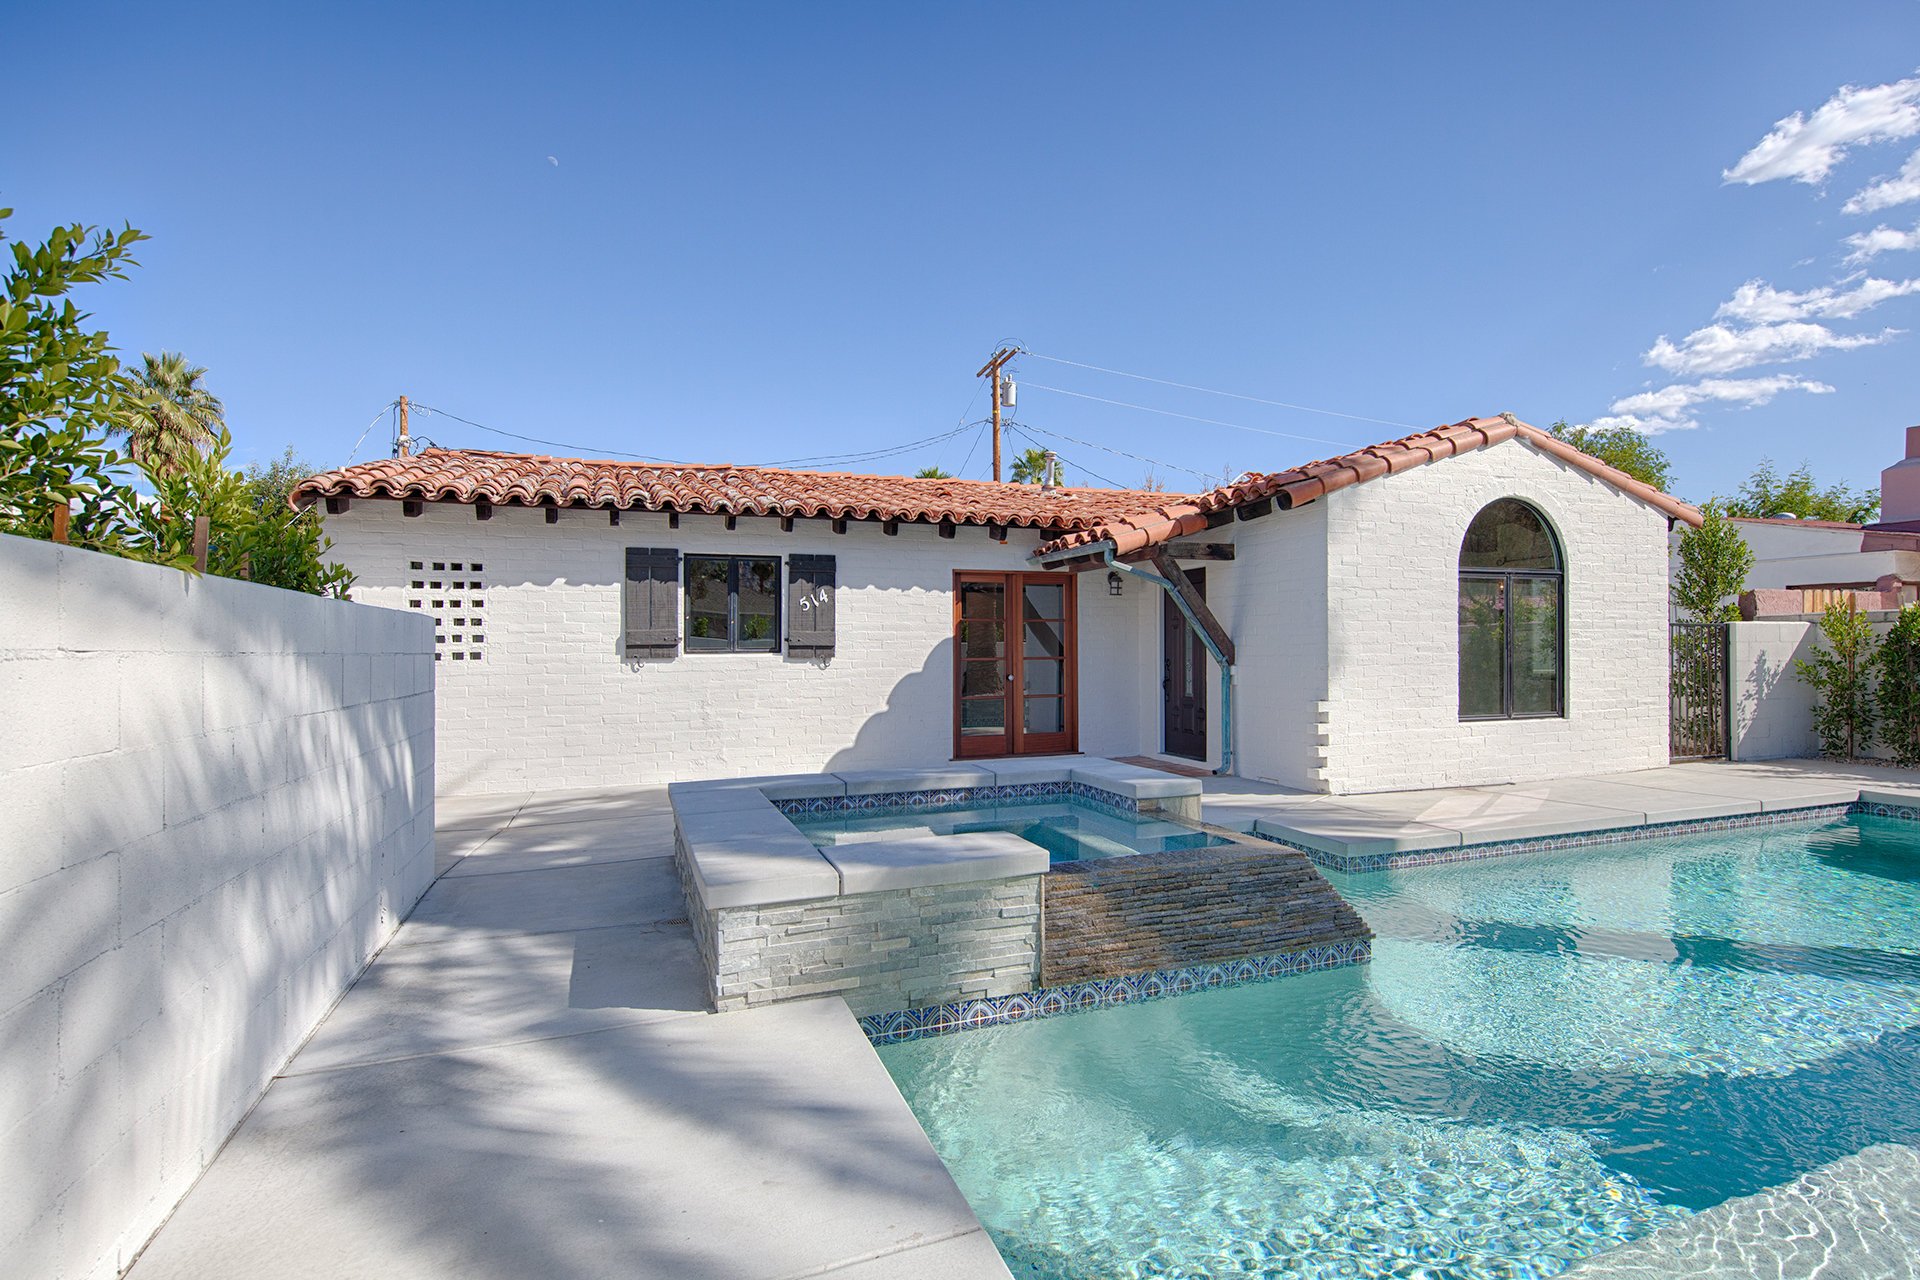 A Spanish pool home in the Warm Sands neighborhood of Palm Springs, CA